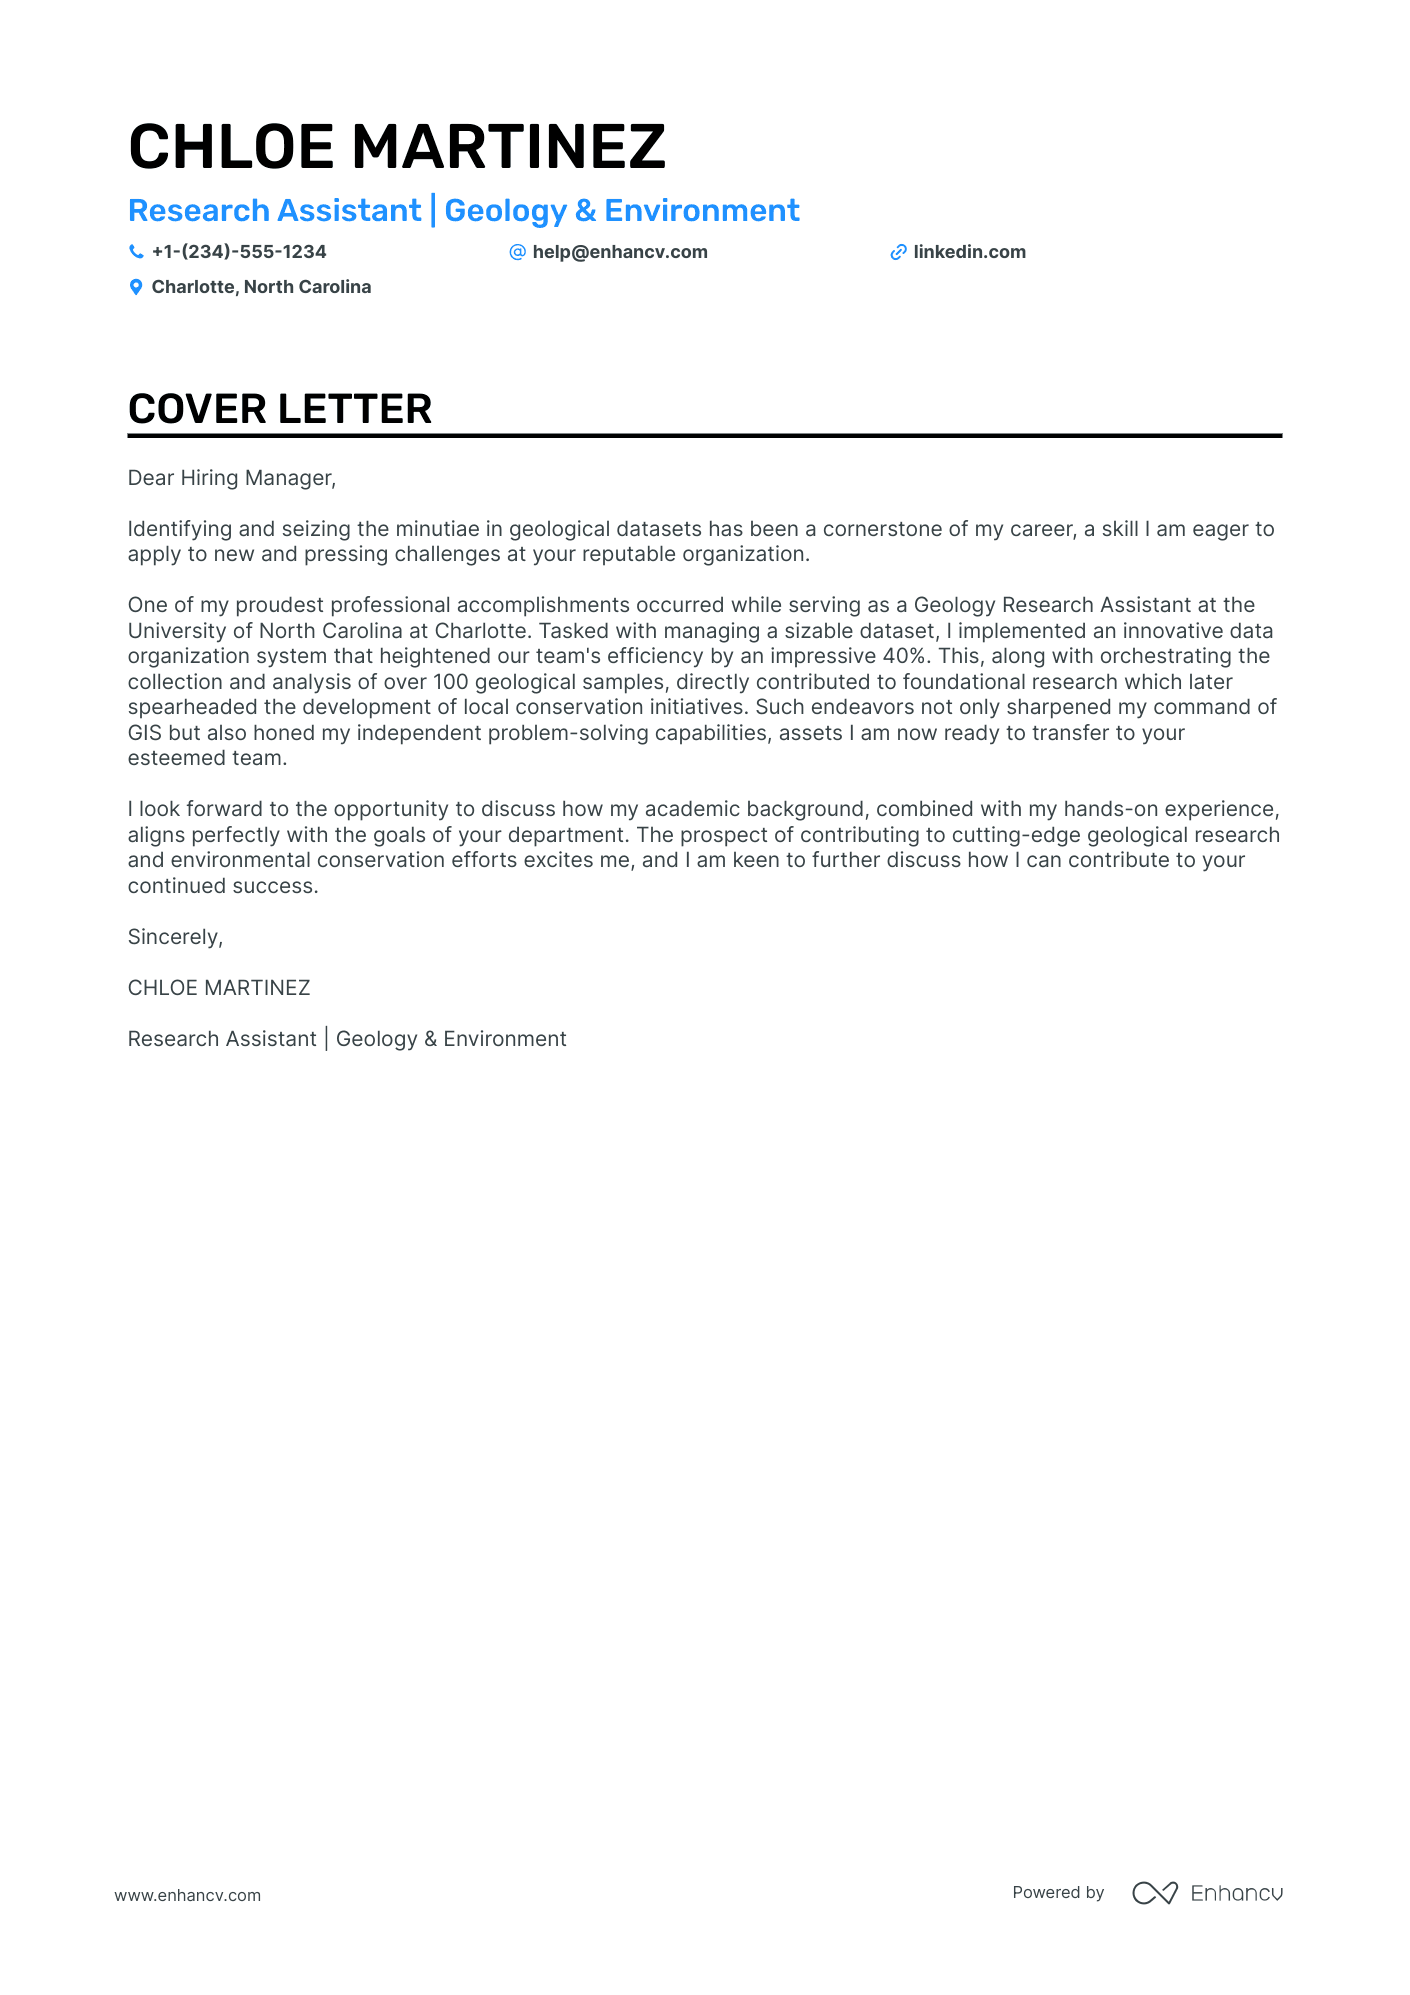 research assistant position cover letter sample